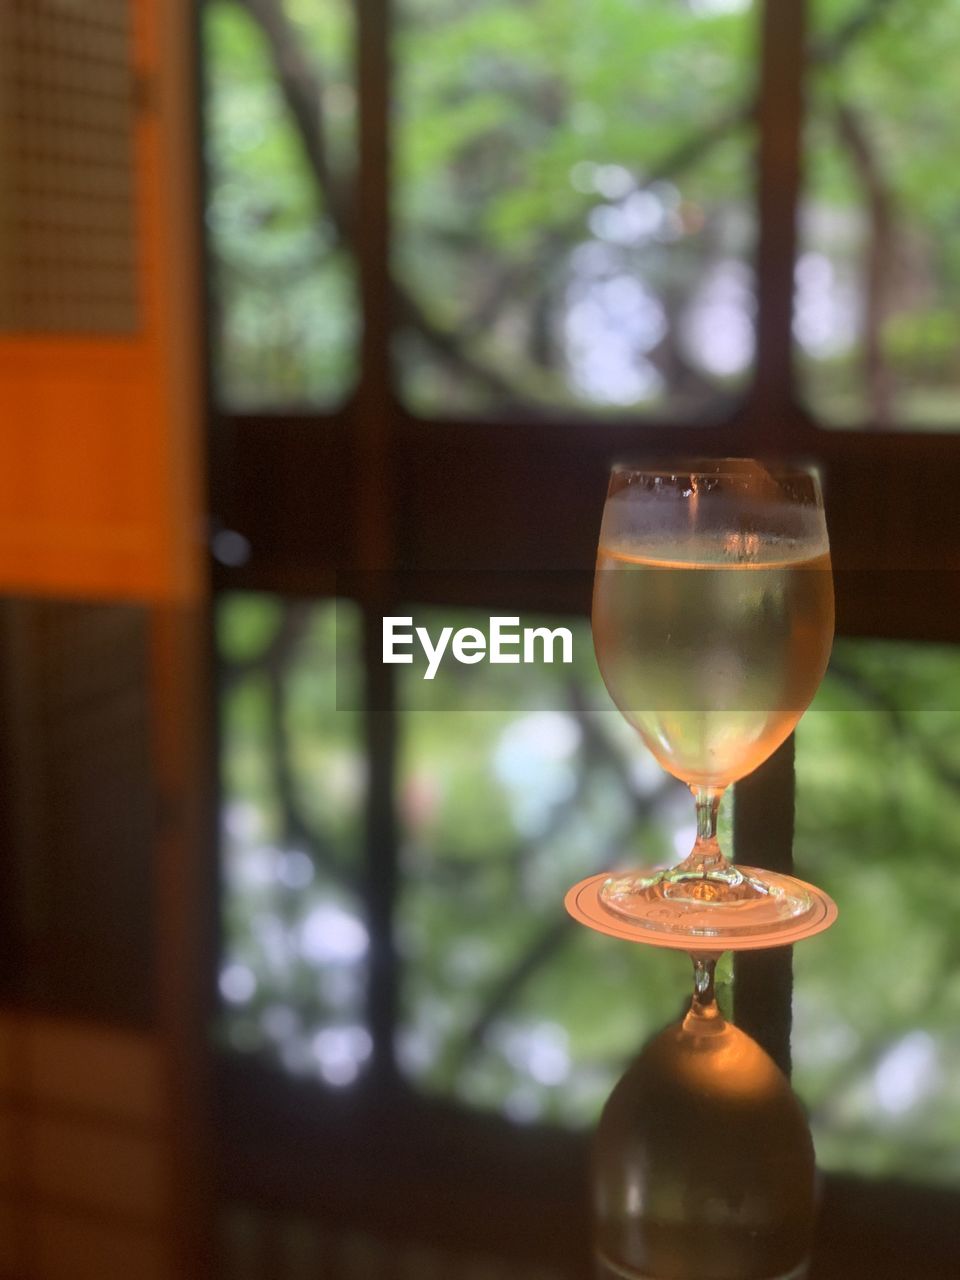 CLOSE-UP OF WINEGLASS ON TABLE